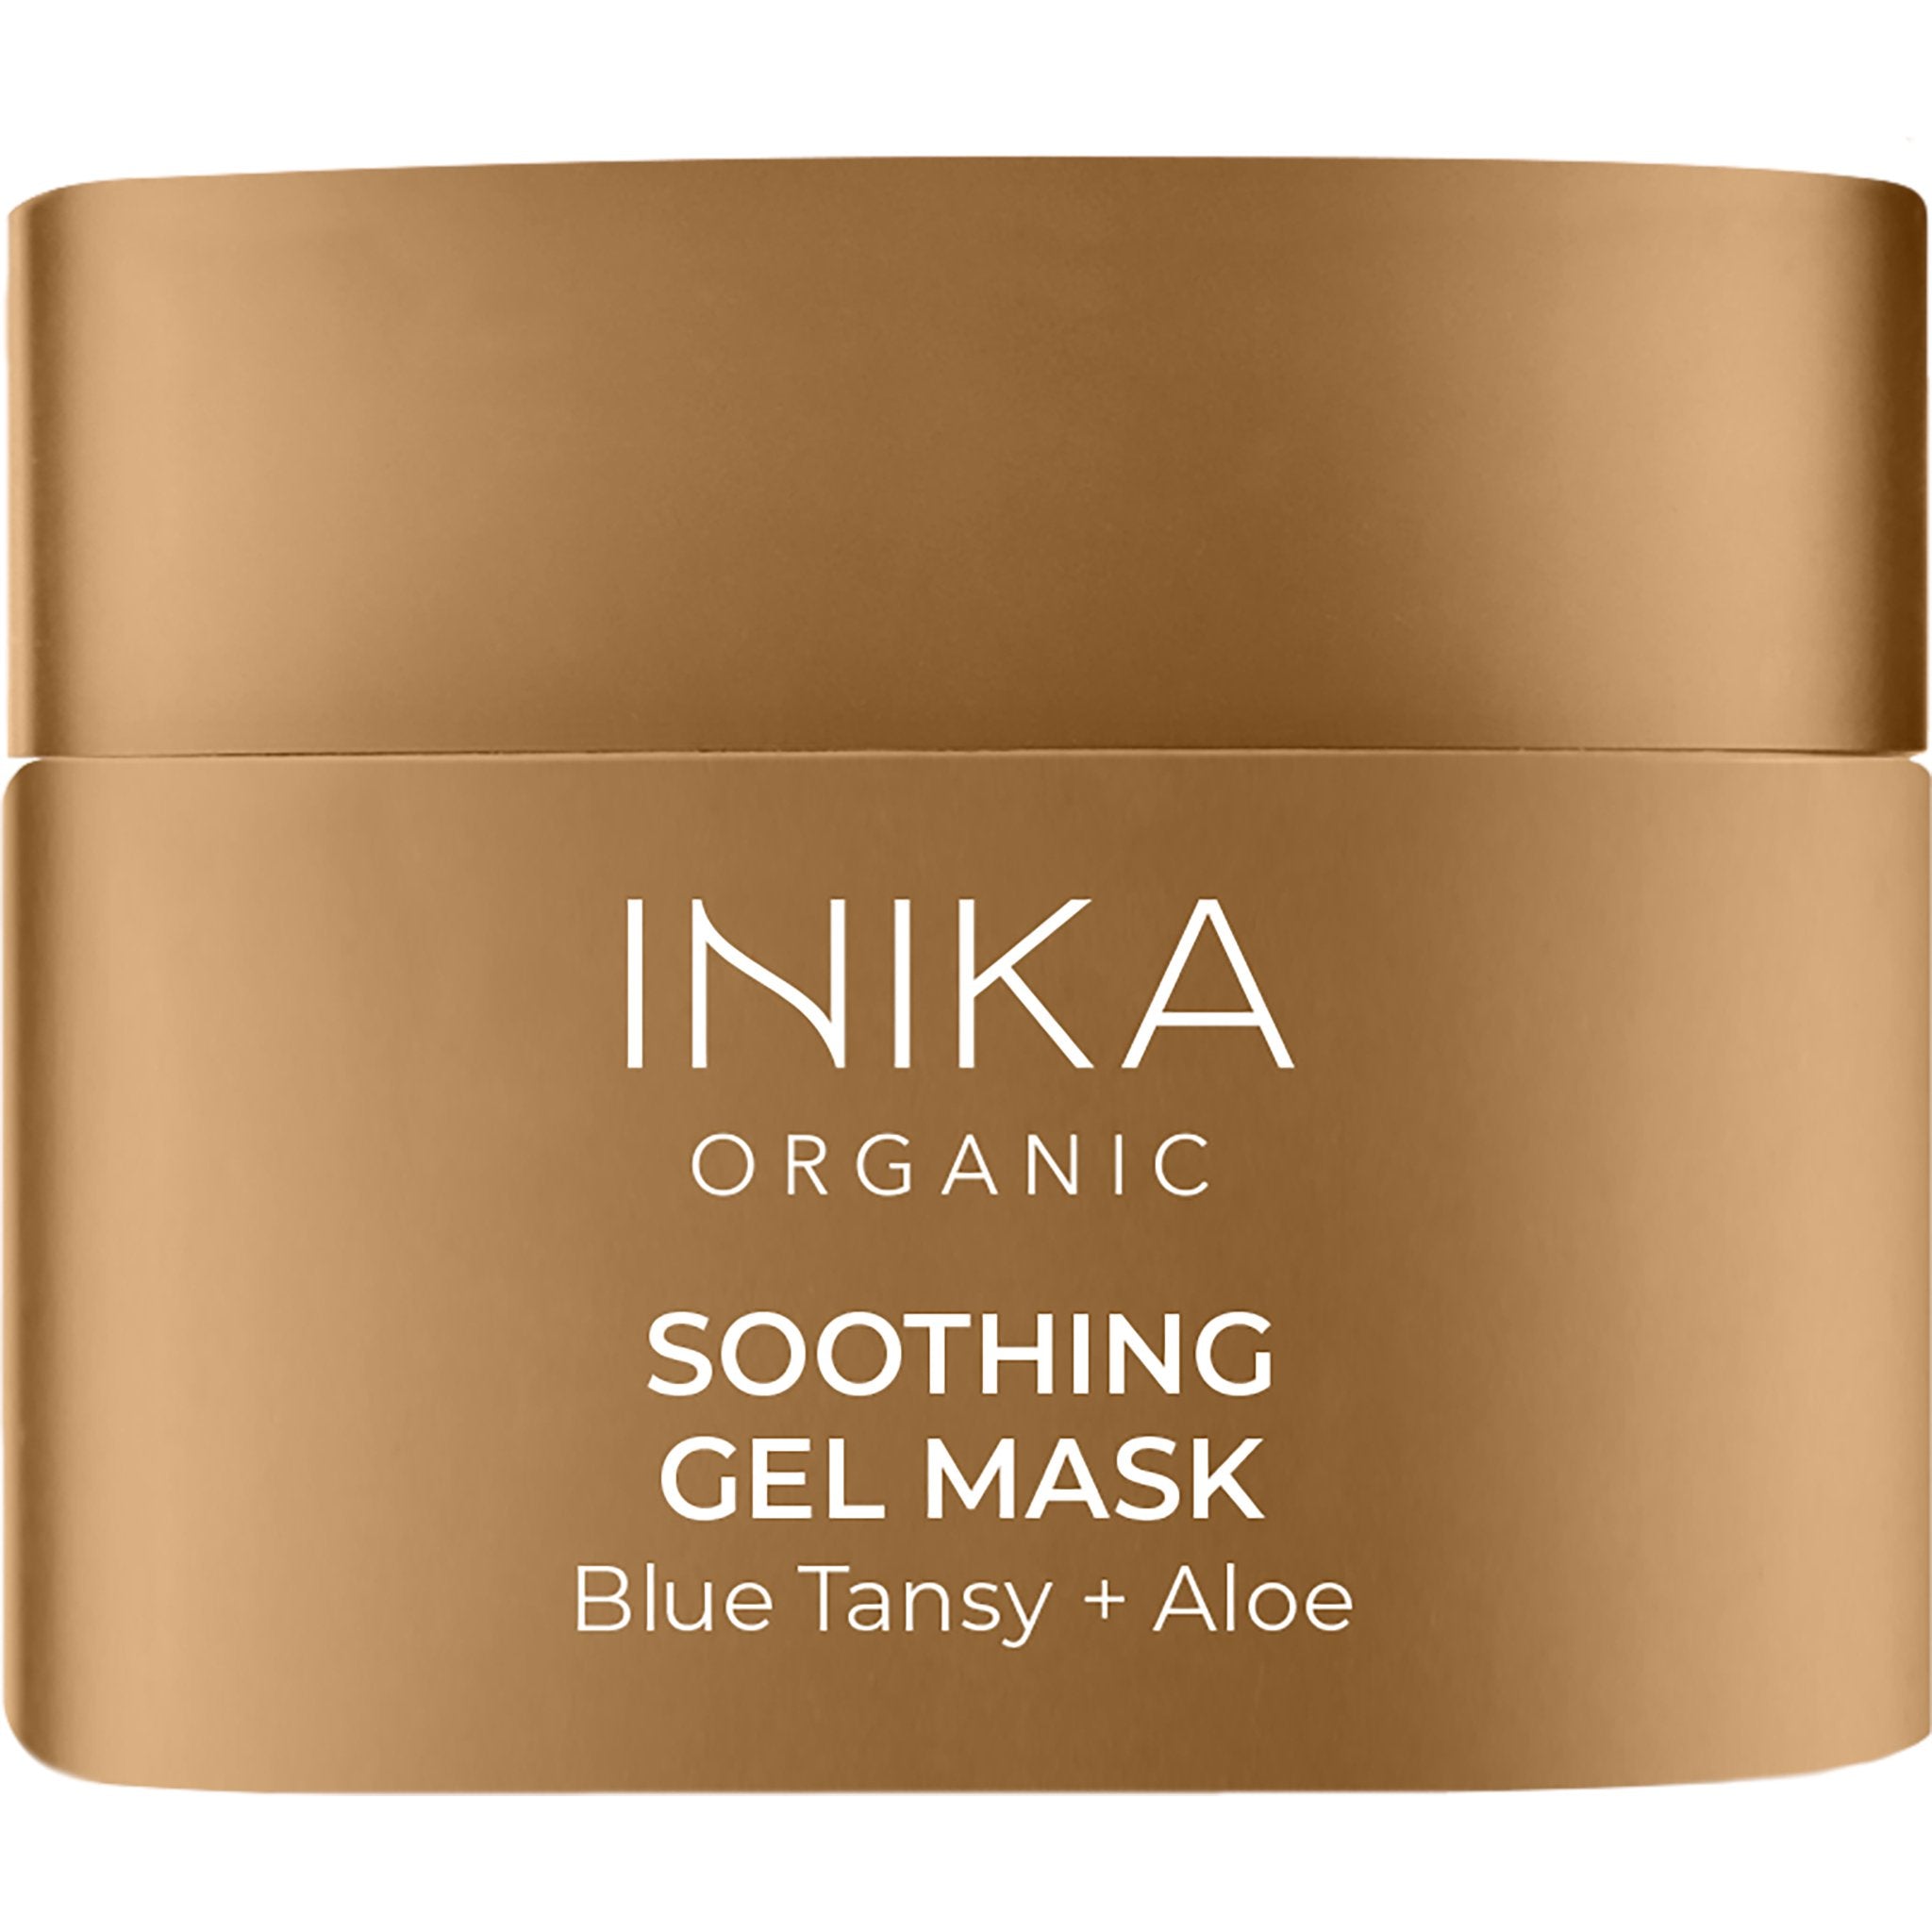 Soothing Gel Mask - mypure.co.uk